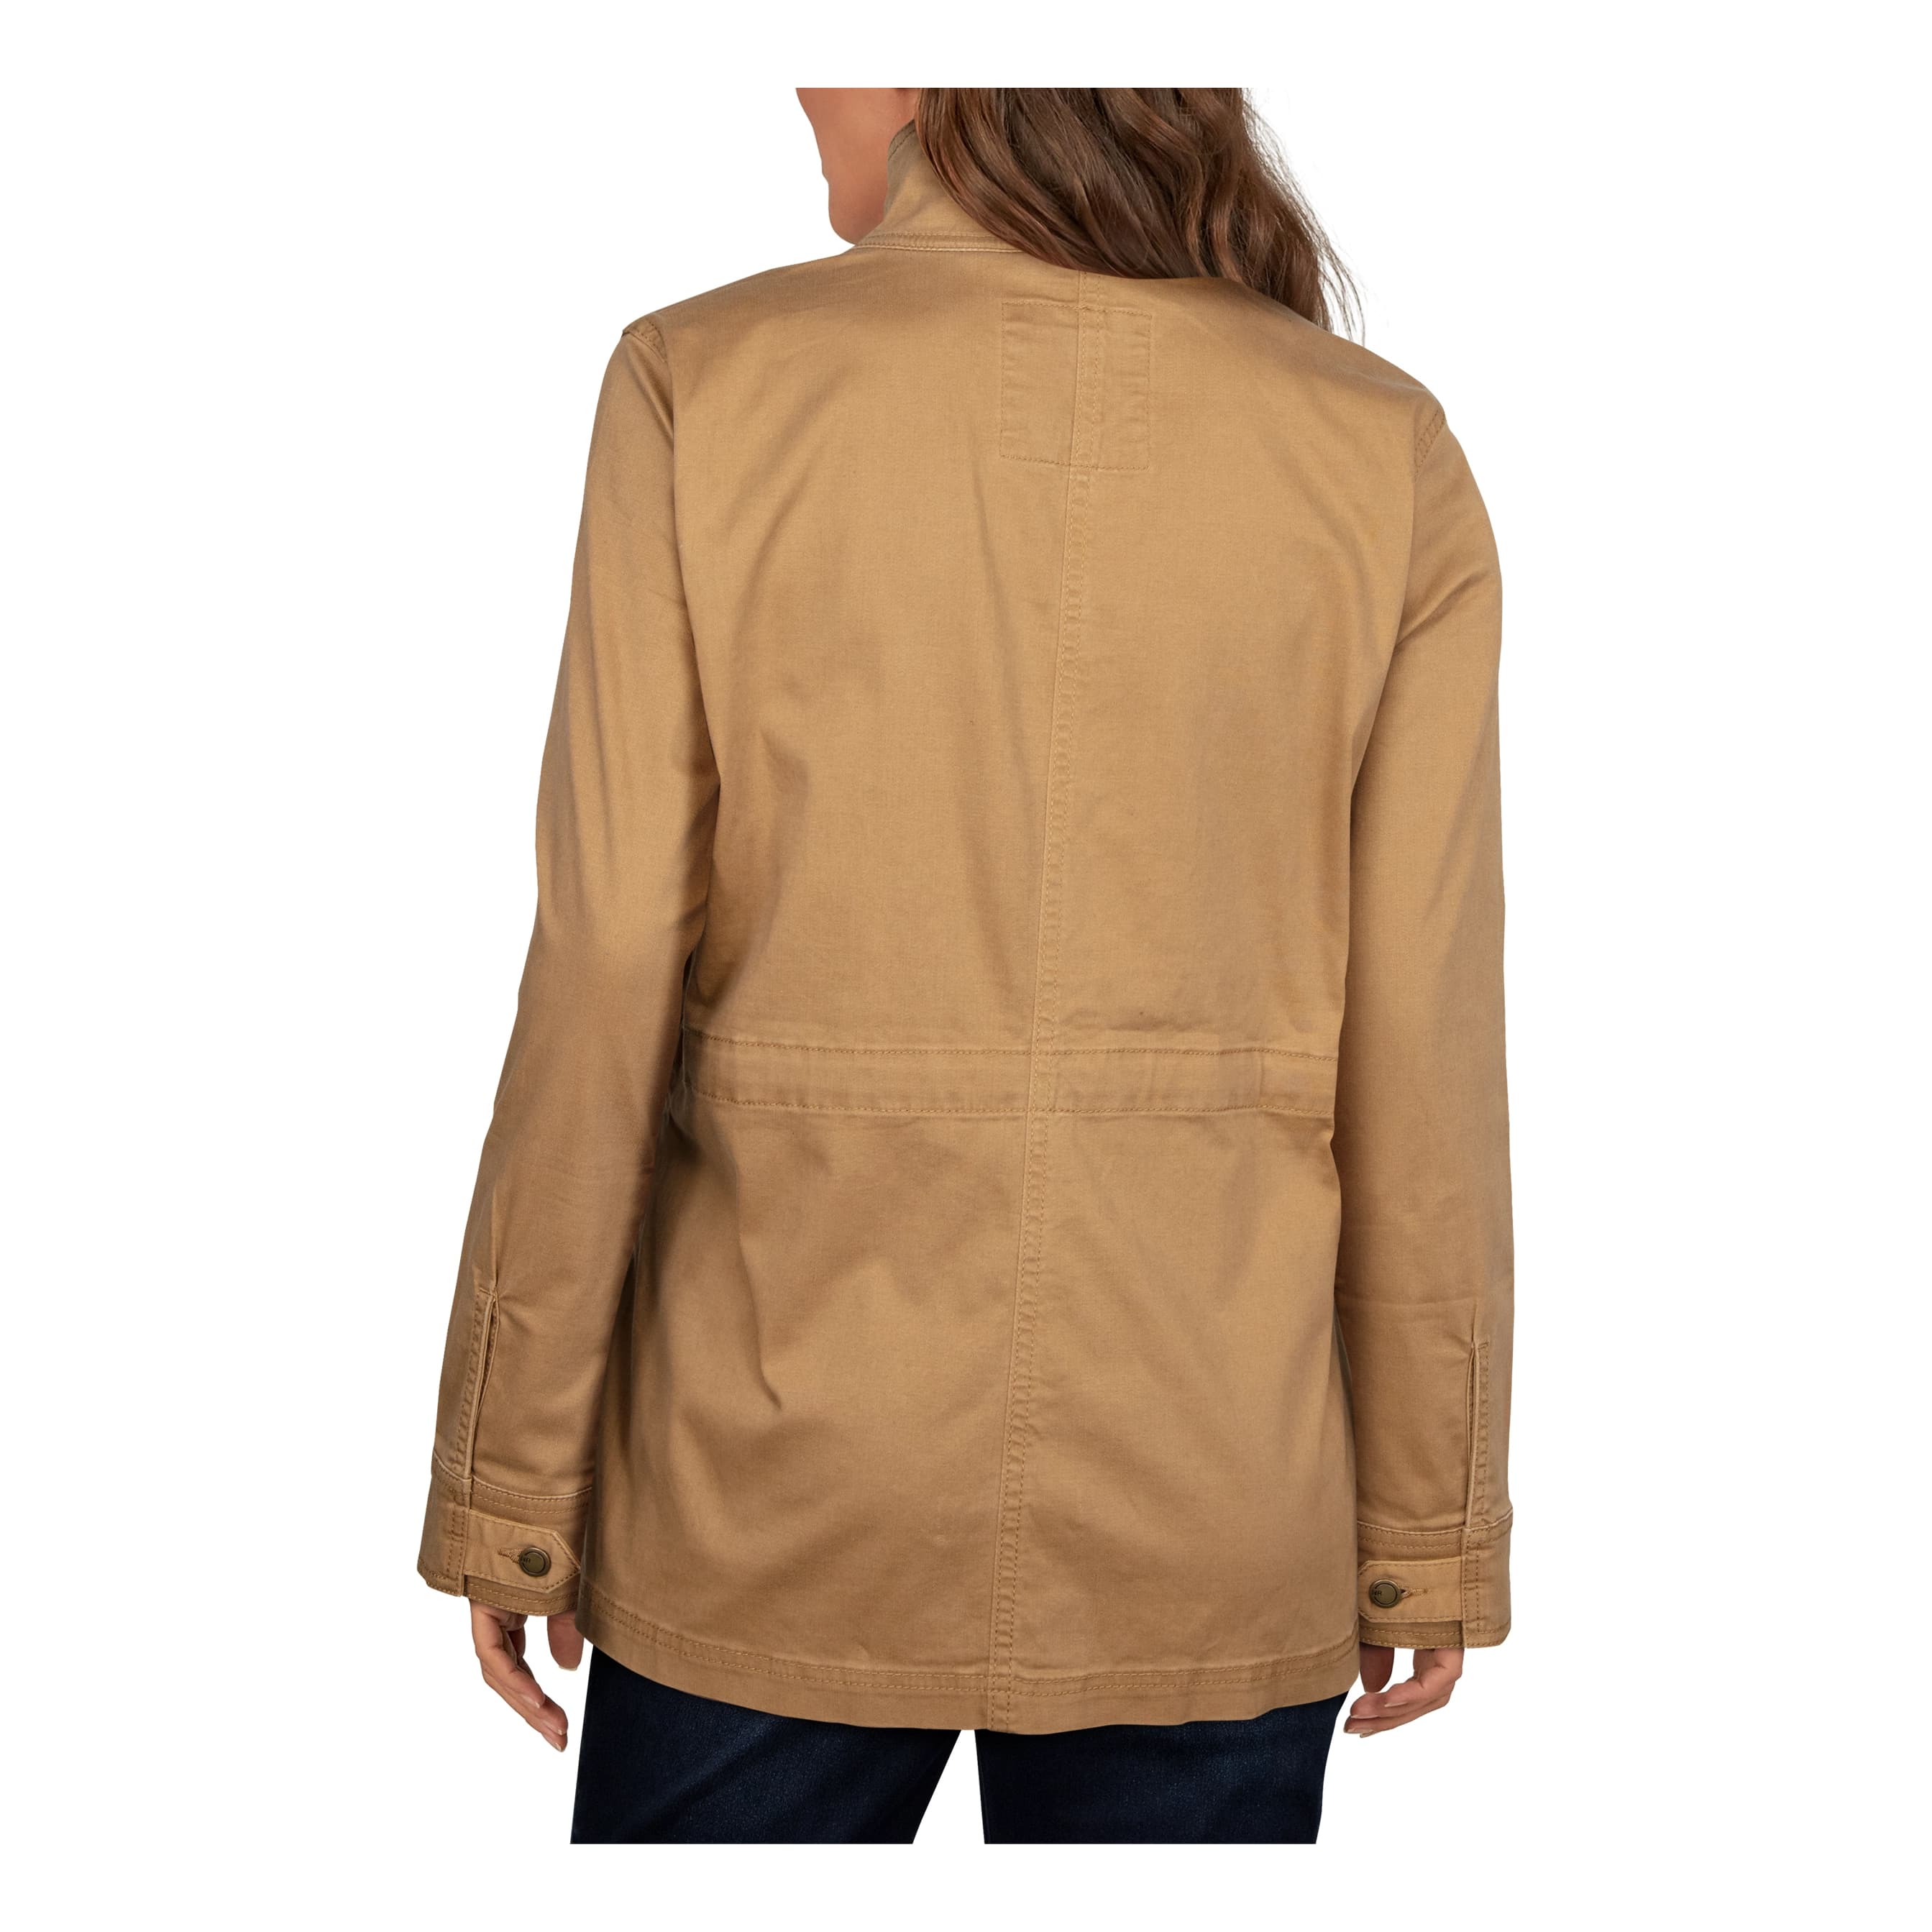 Natural Reflections® Women’s Utility Jacket - Iced Coffee - back